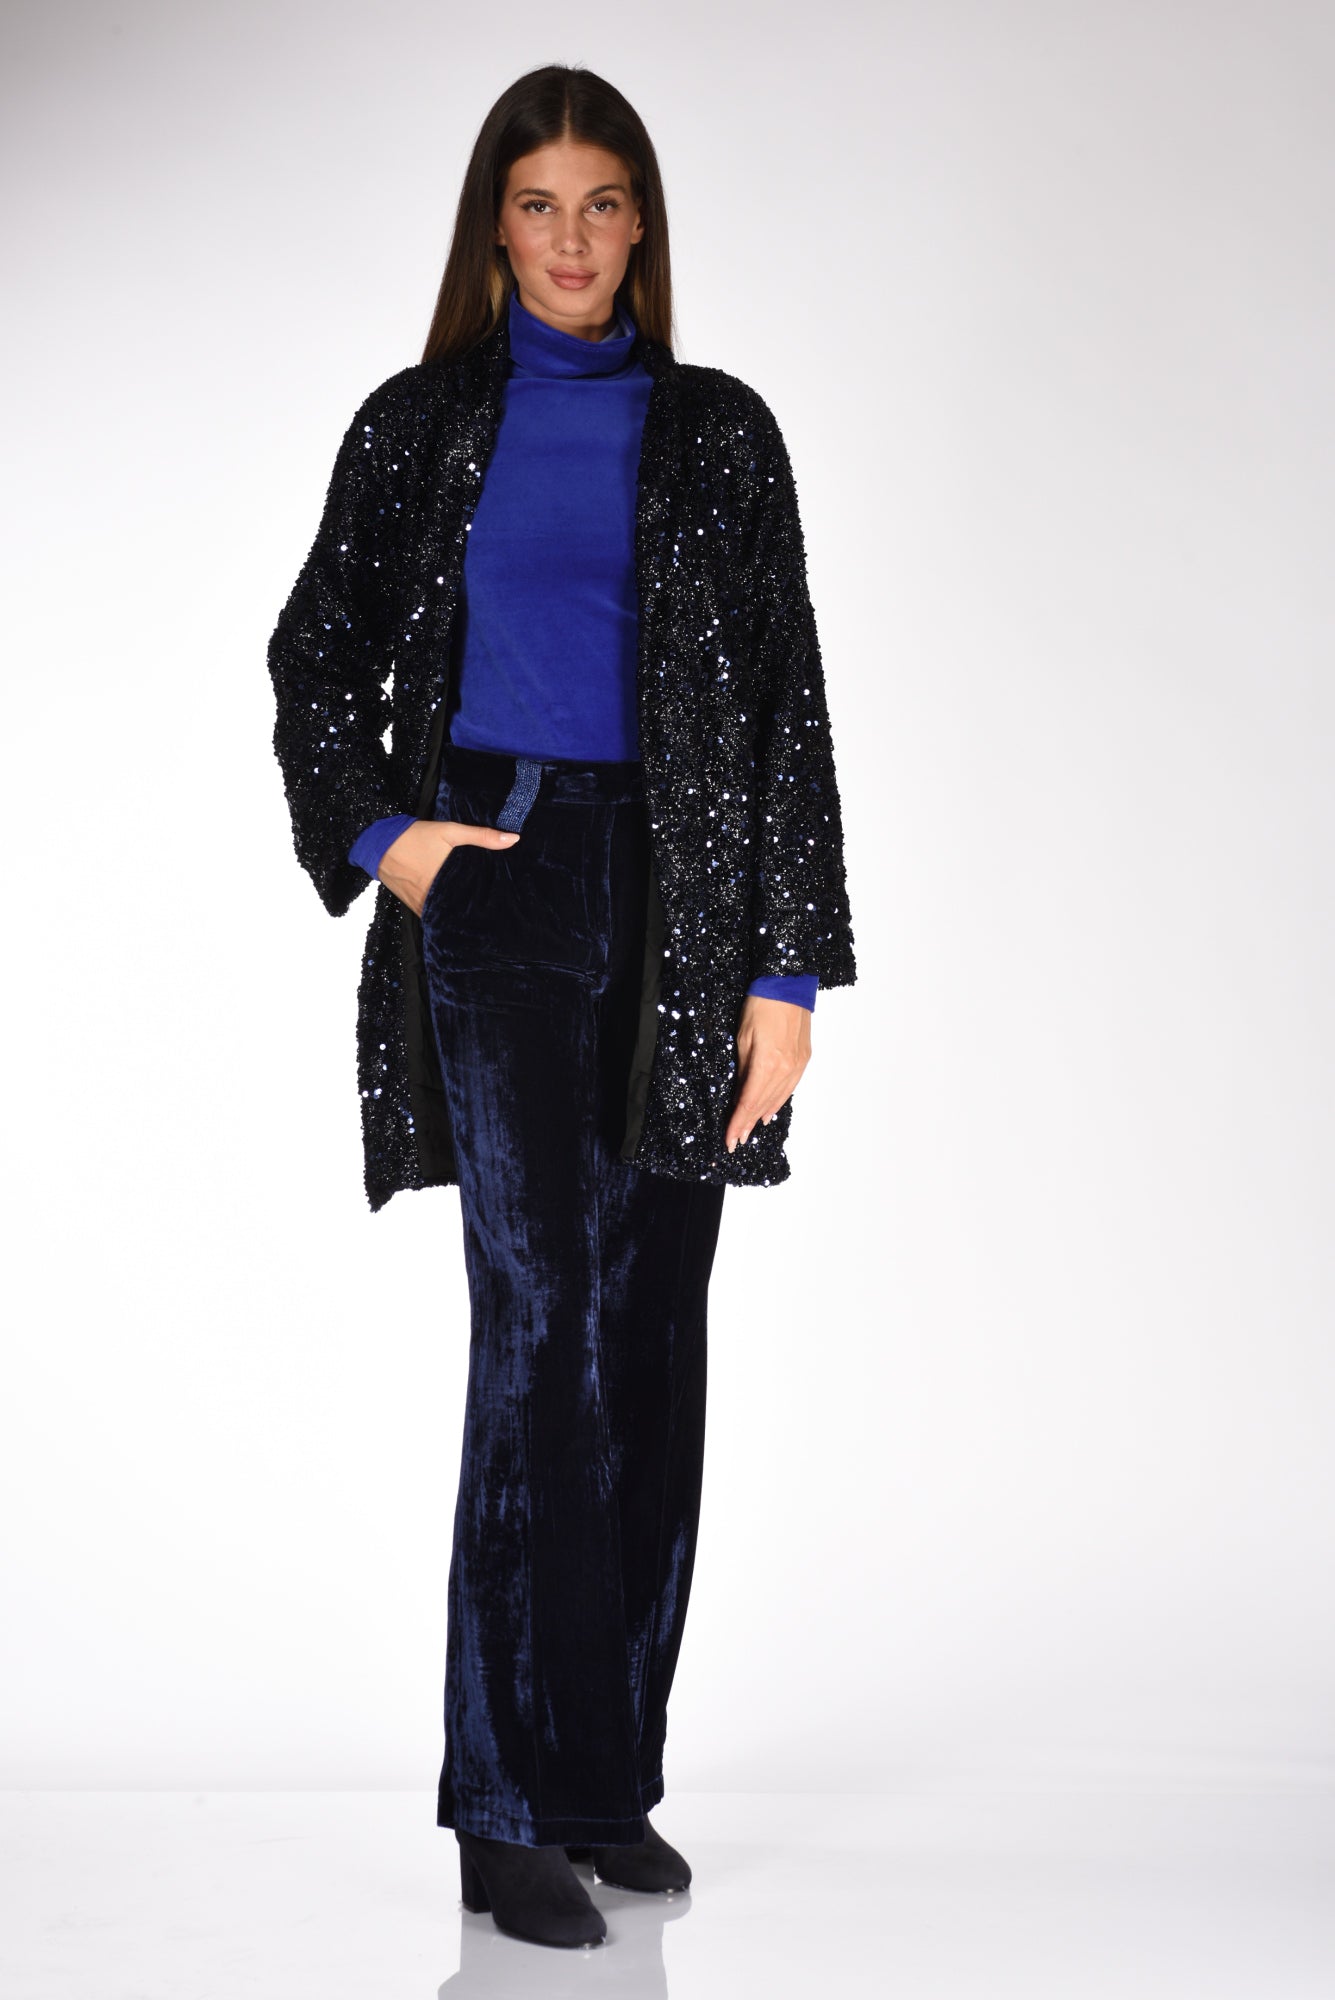 The Twins Giacca Paillettes Blu Donna